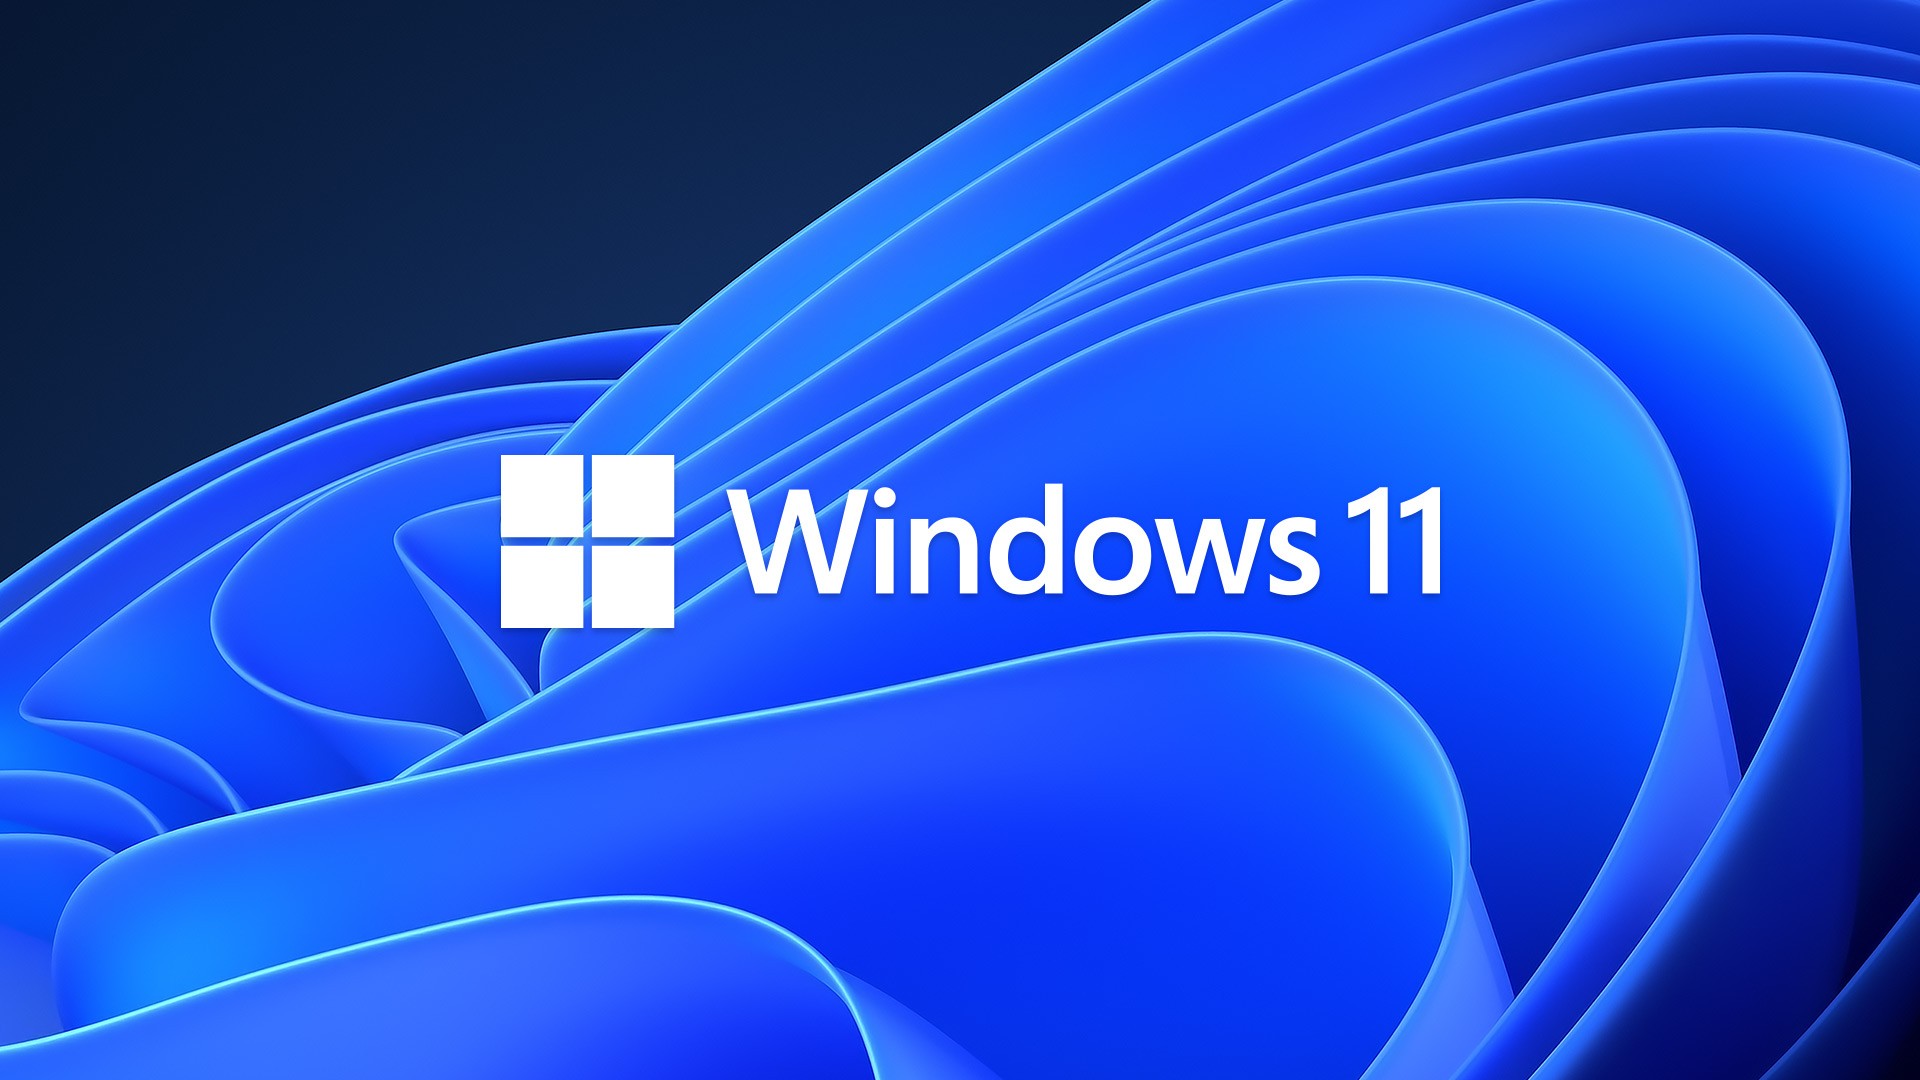 Microsoft Officially Launches Windows 11